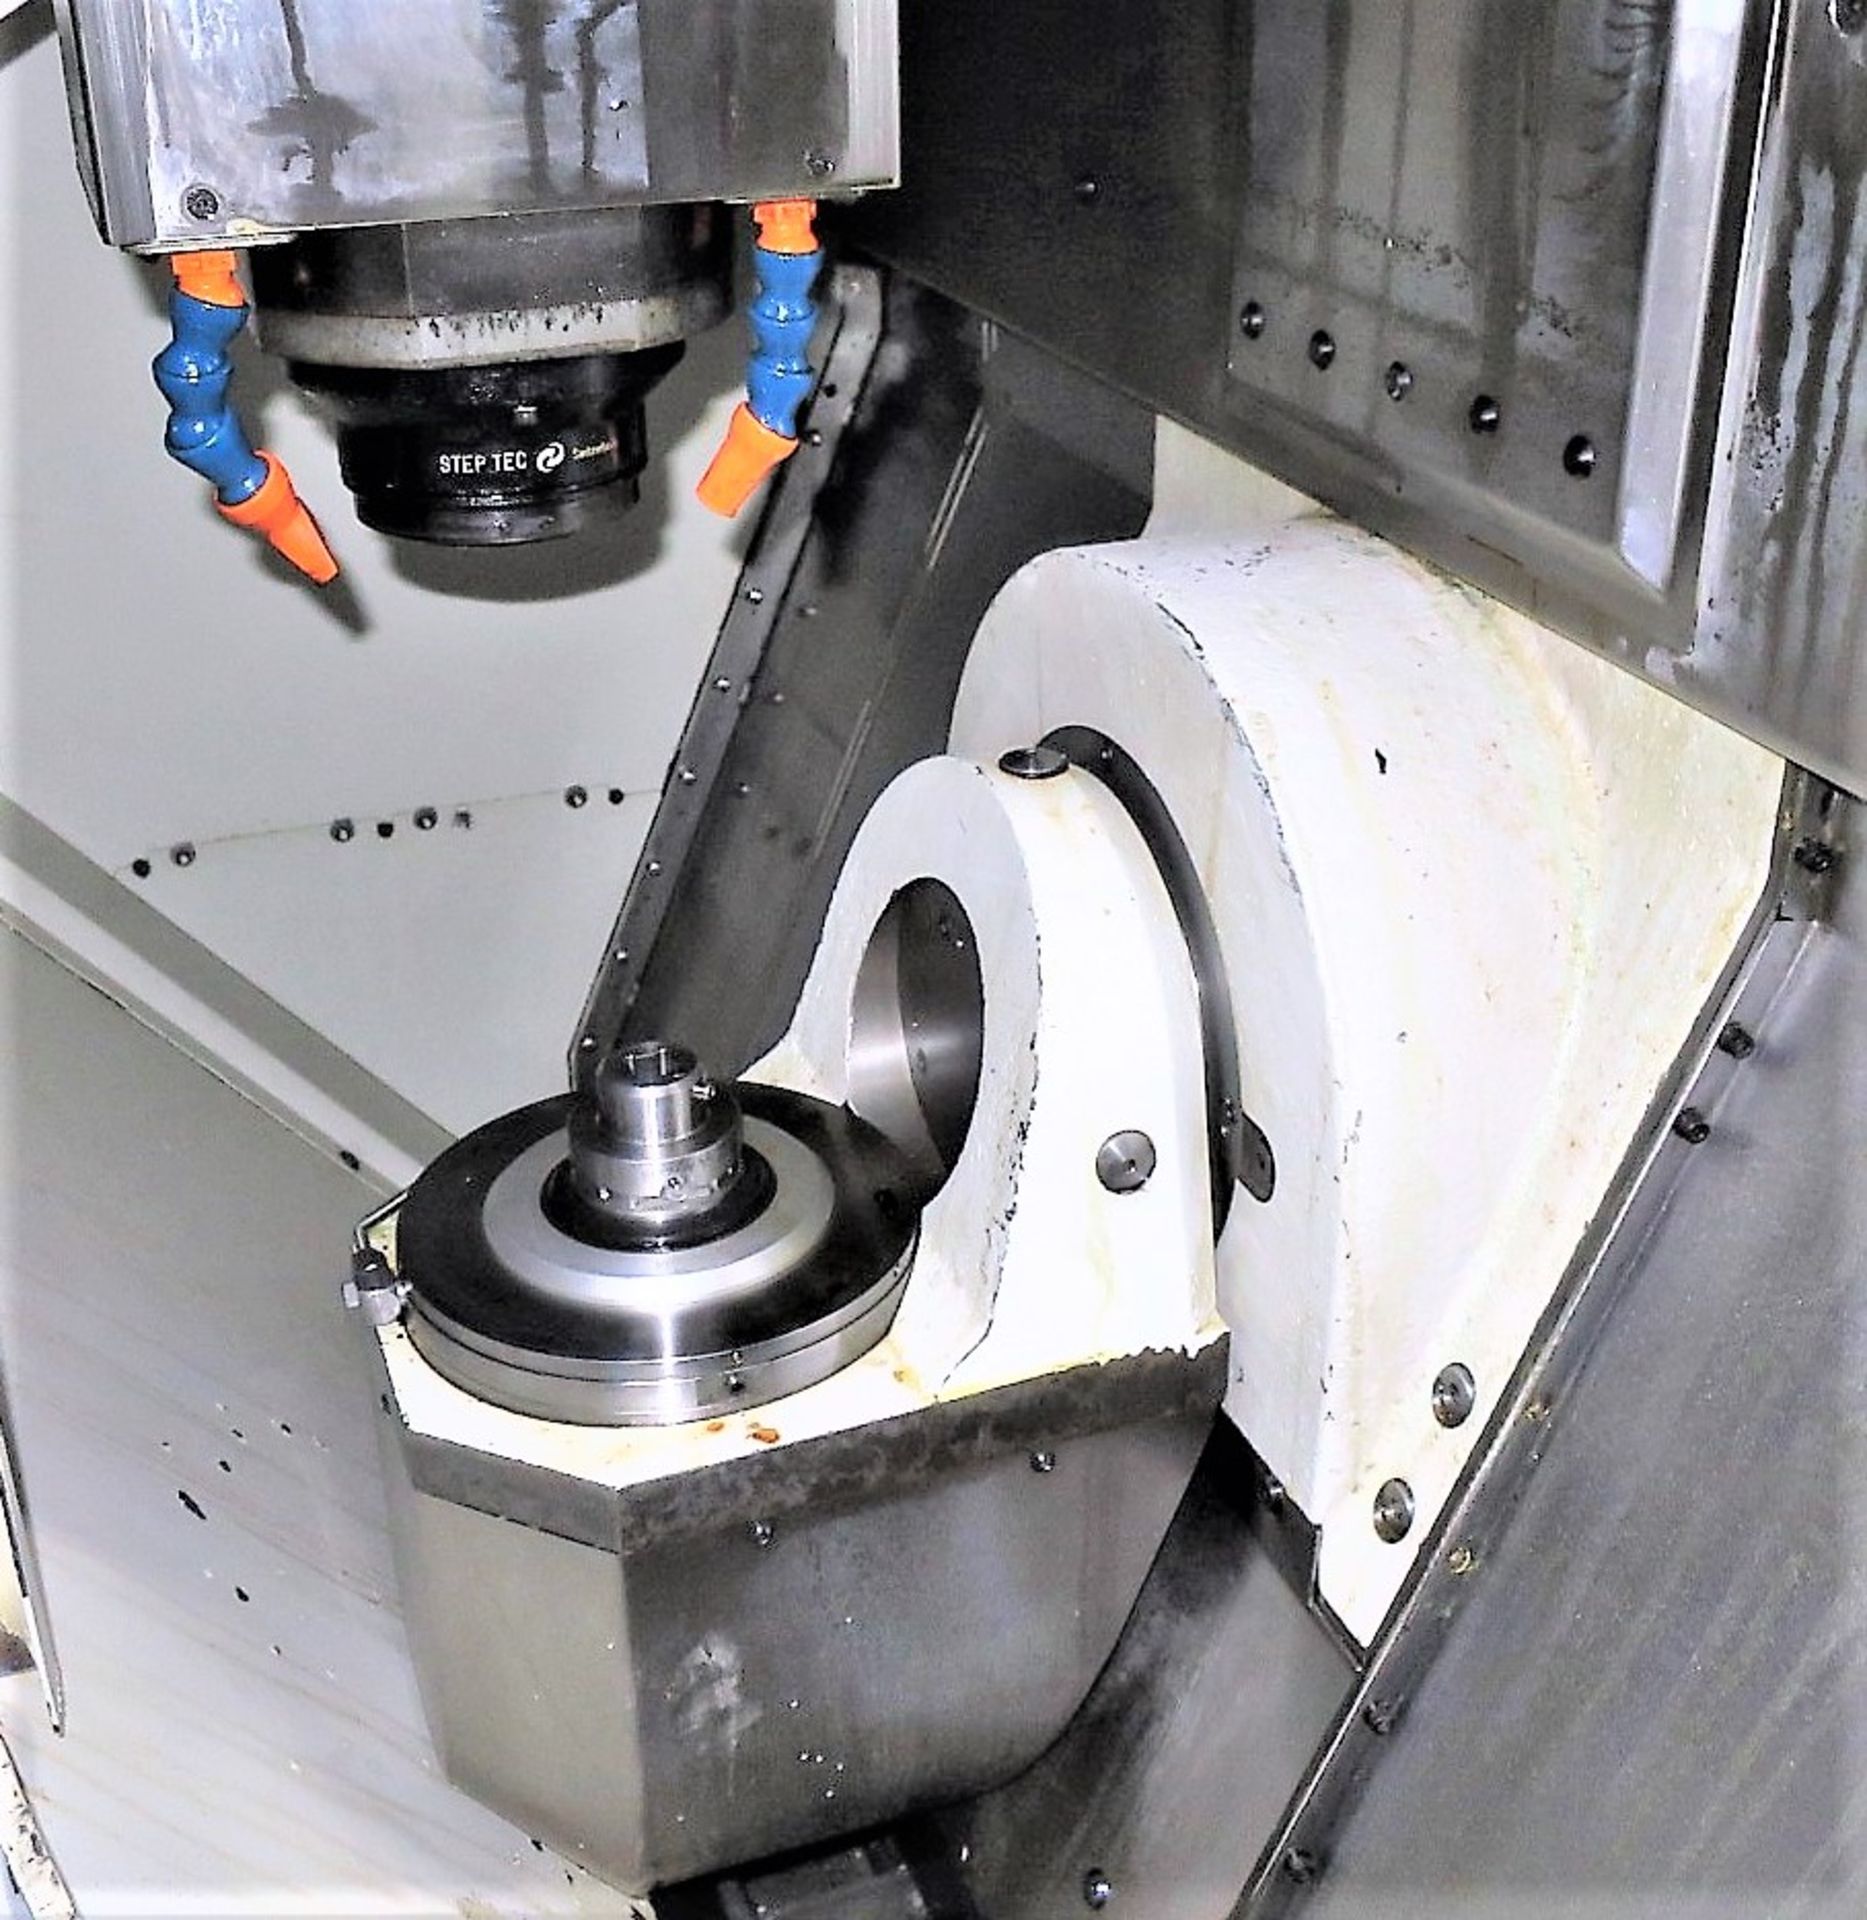 MIKRON HSM-400U HIGH SPEED 5-AXIS CNC VERTICAL MACHINING CENTER, 42,000 RPM, - Image 6 of 8